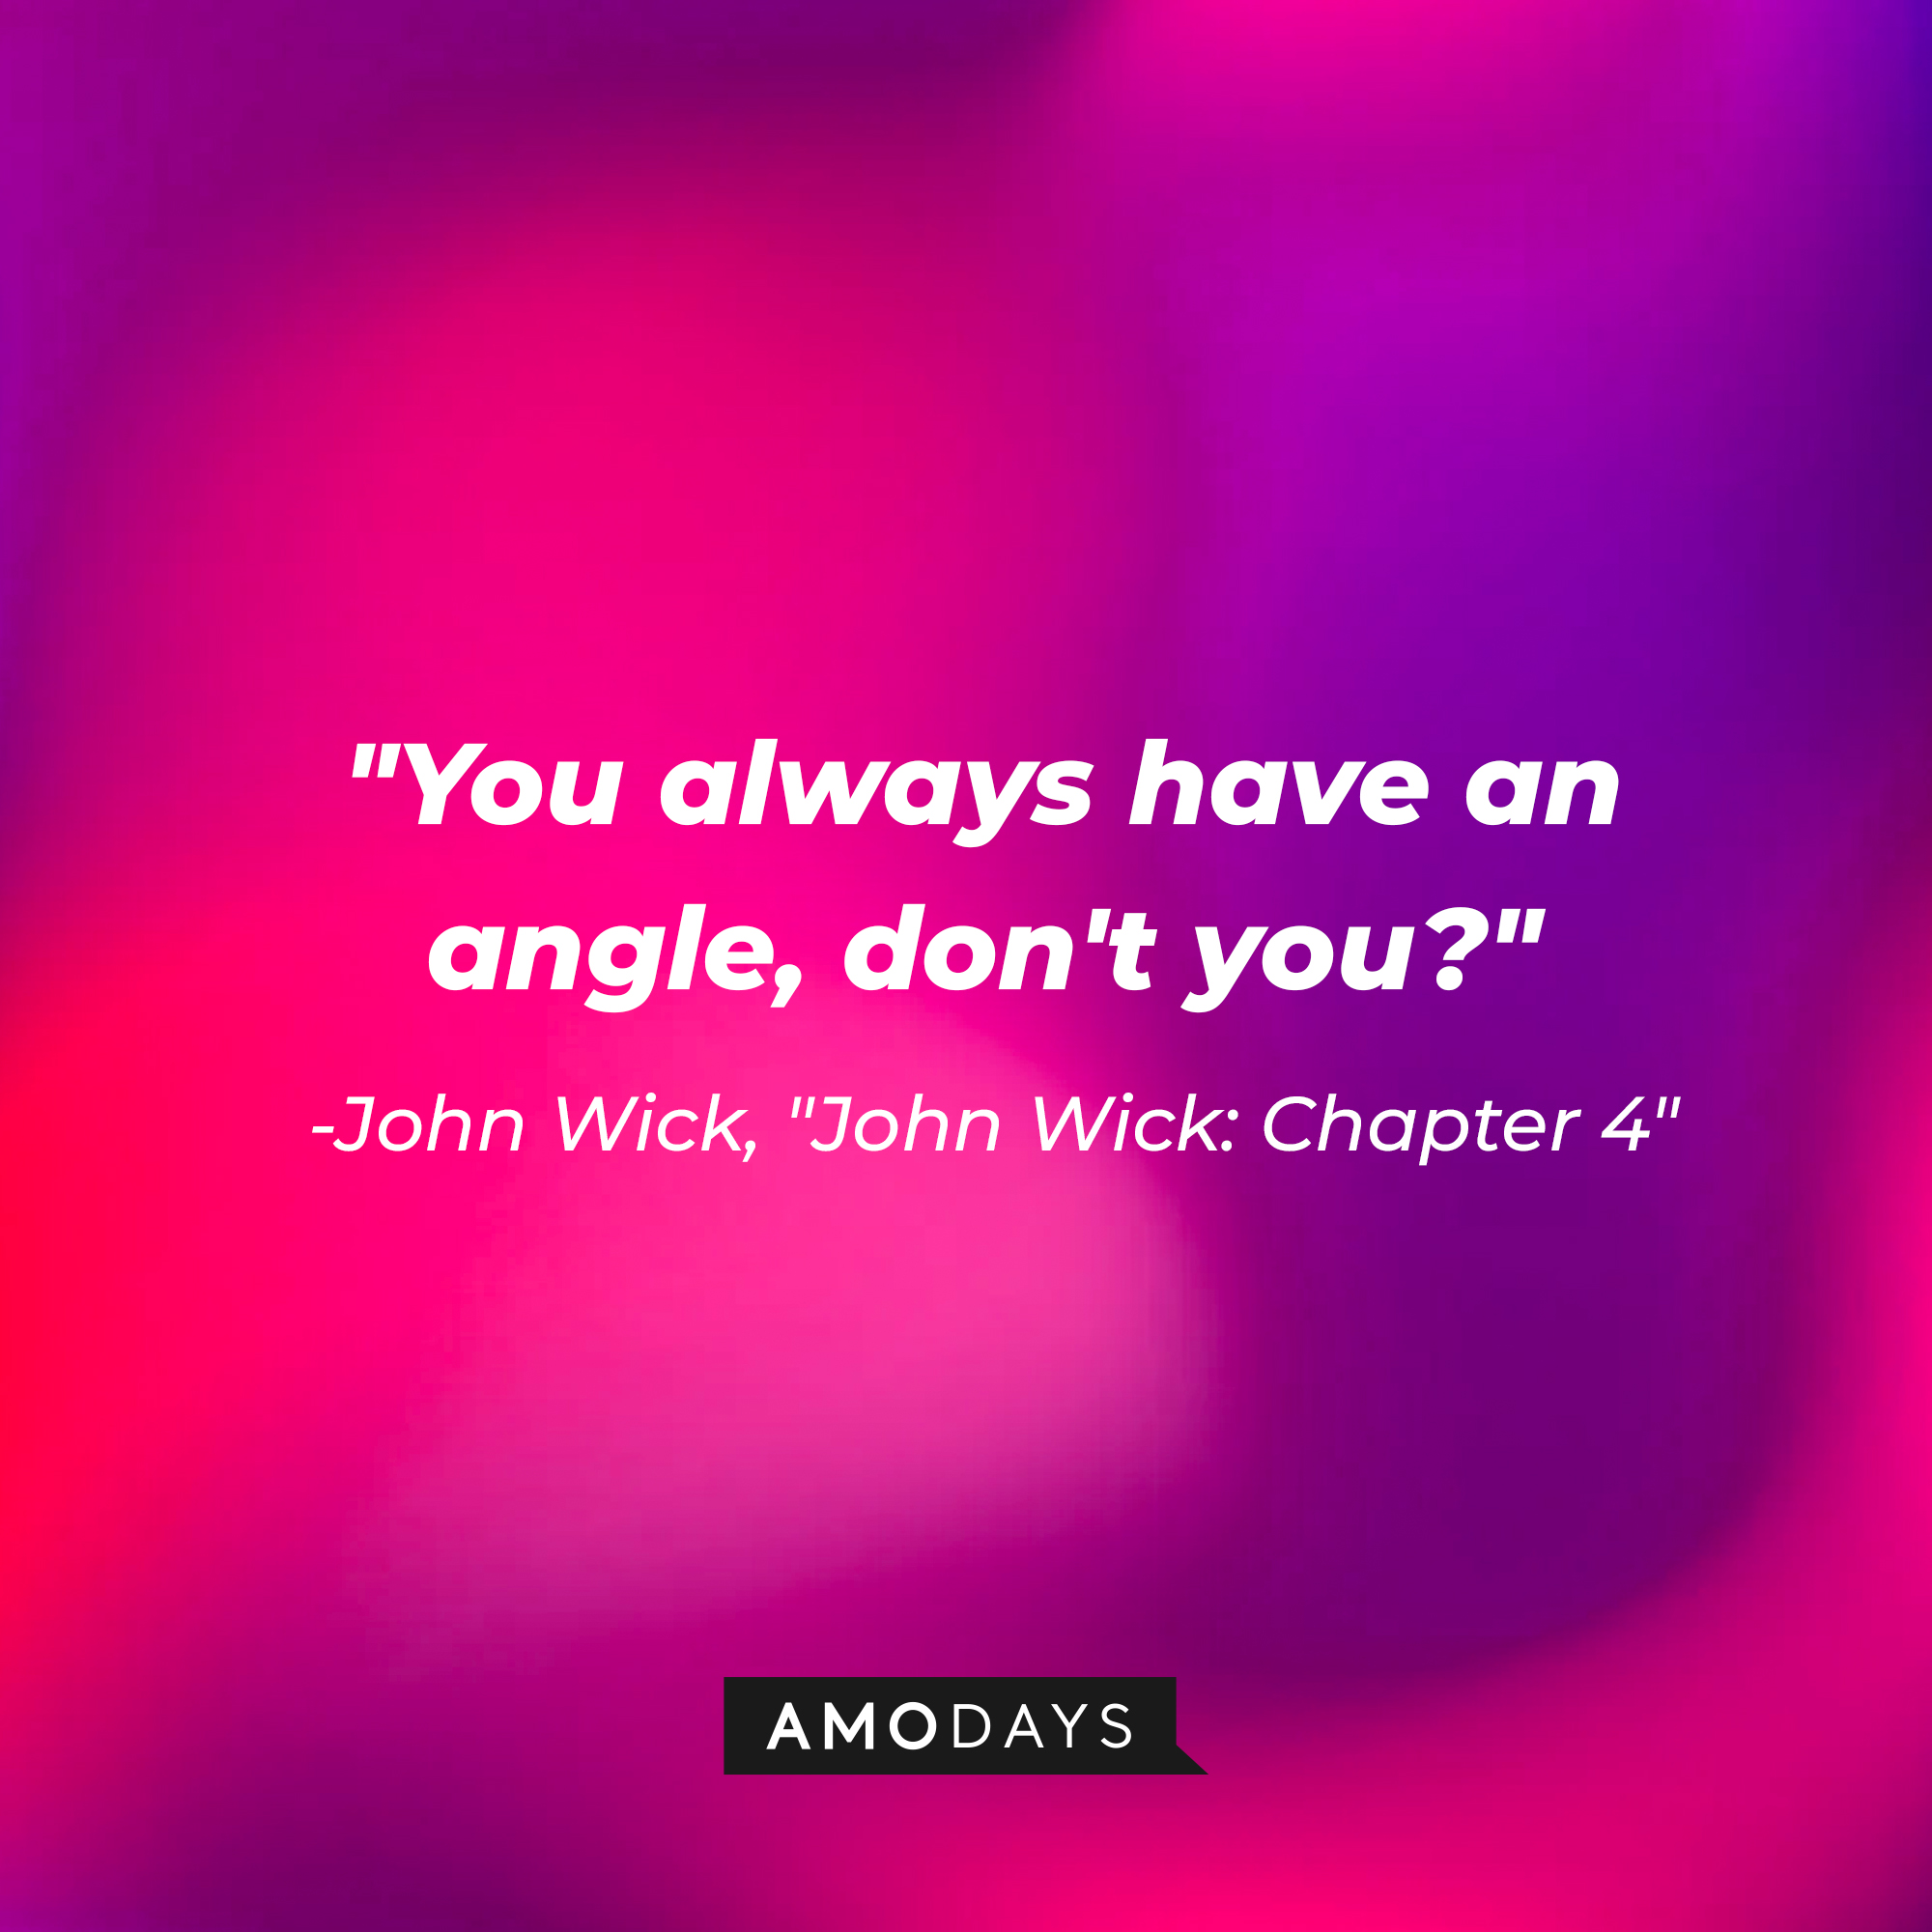 John Wick's quote: "You always have an angle, don't you?" | Source: AmoDays